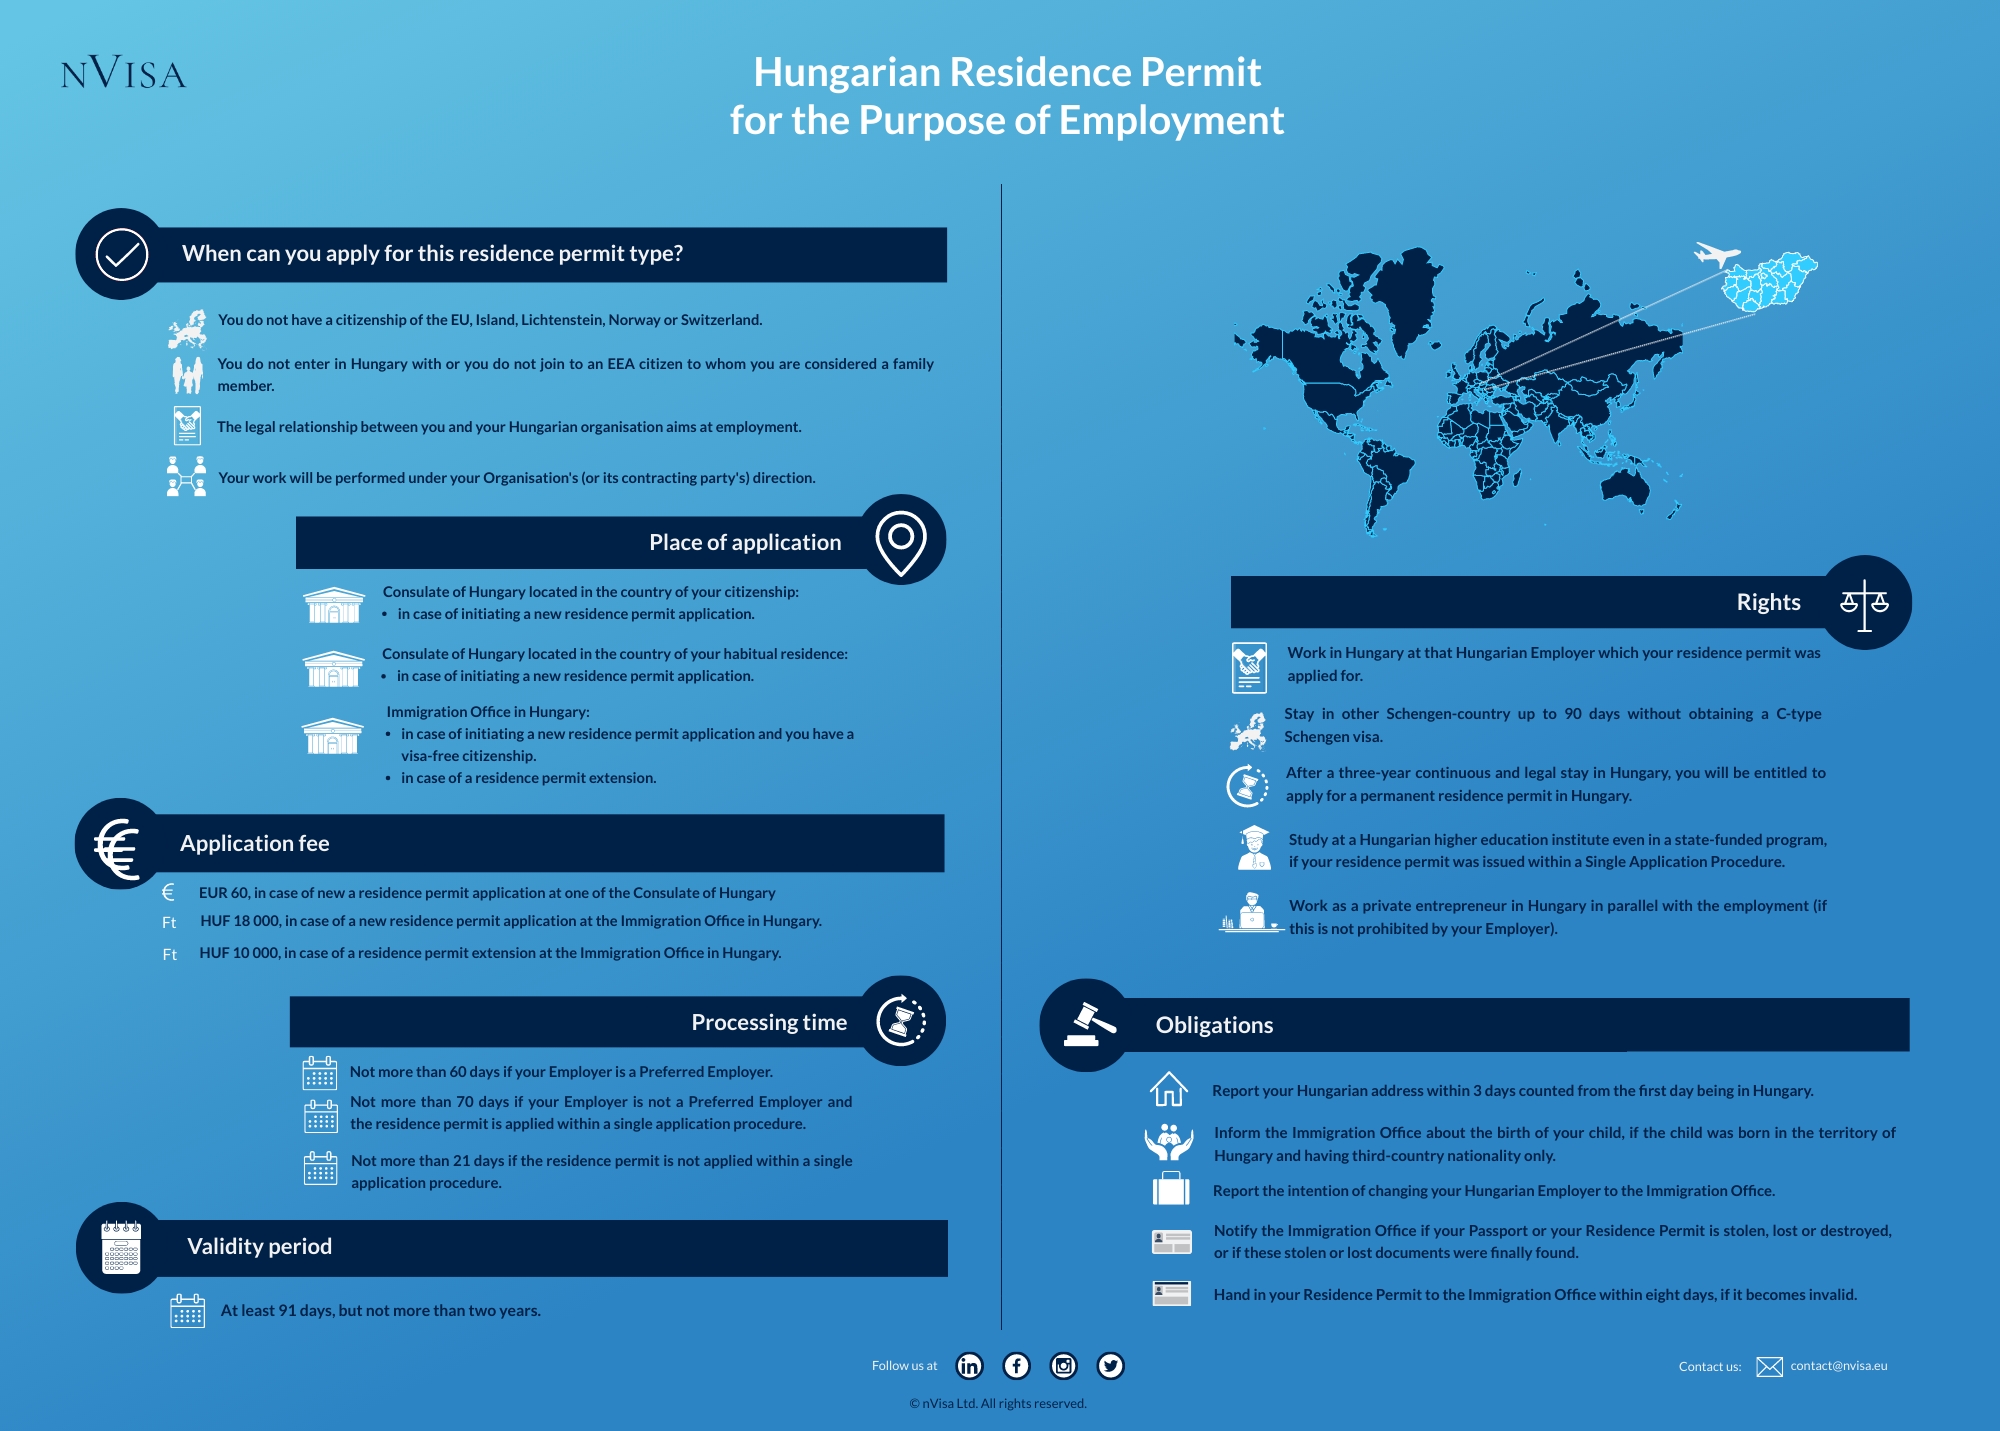 Infographic about immigration requirements and the details of obtaining a residence permit for employment in Hungary.